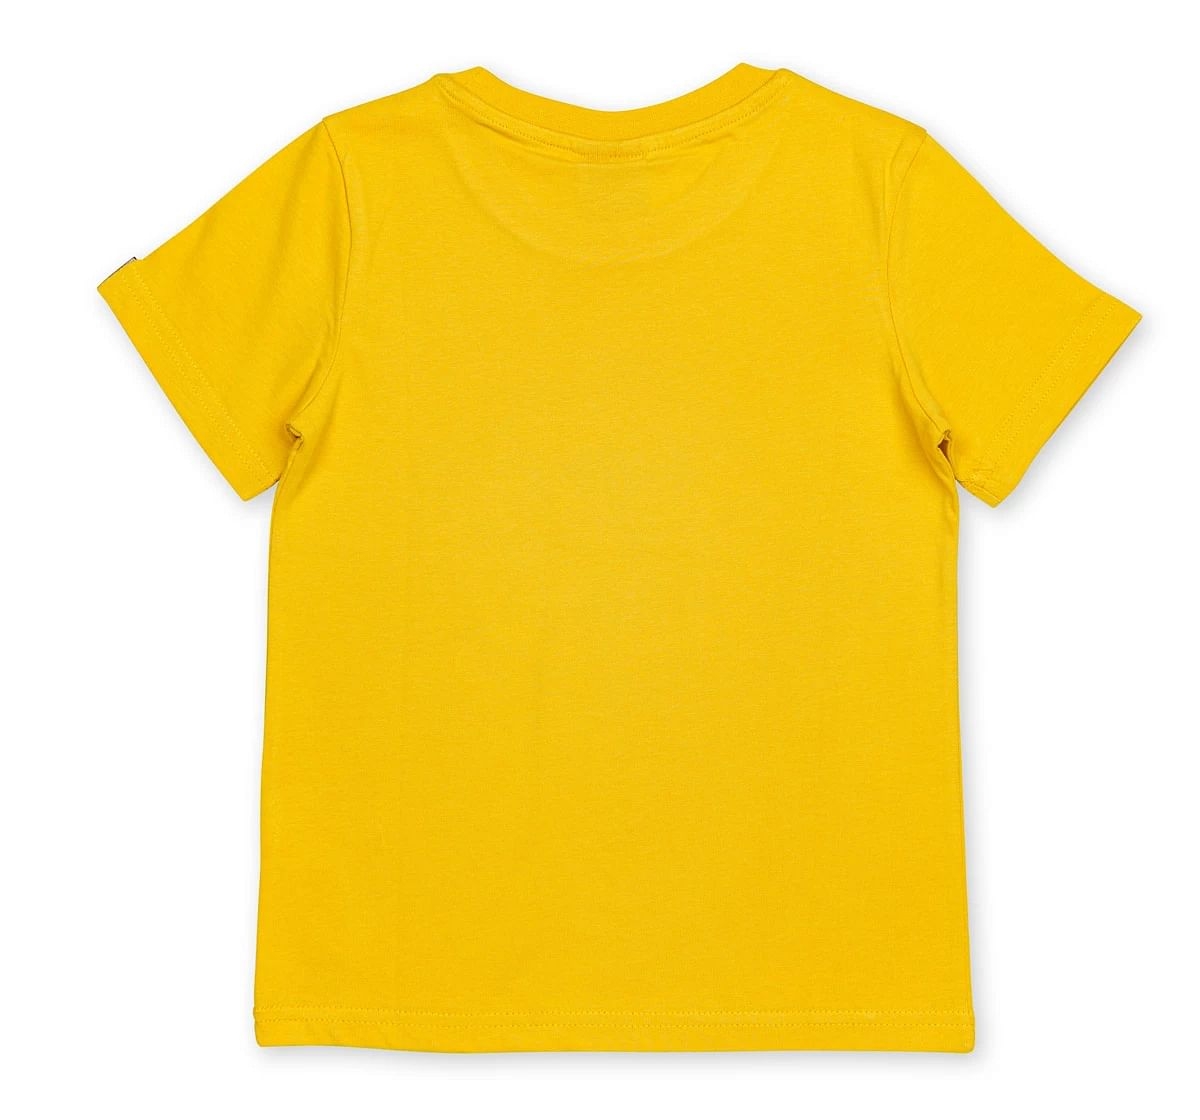 H By Hamleys Half Sleeve Cotton T-shirt Pack of 1 Unisex Yellow